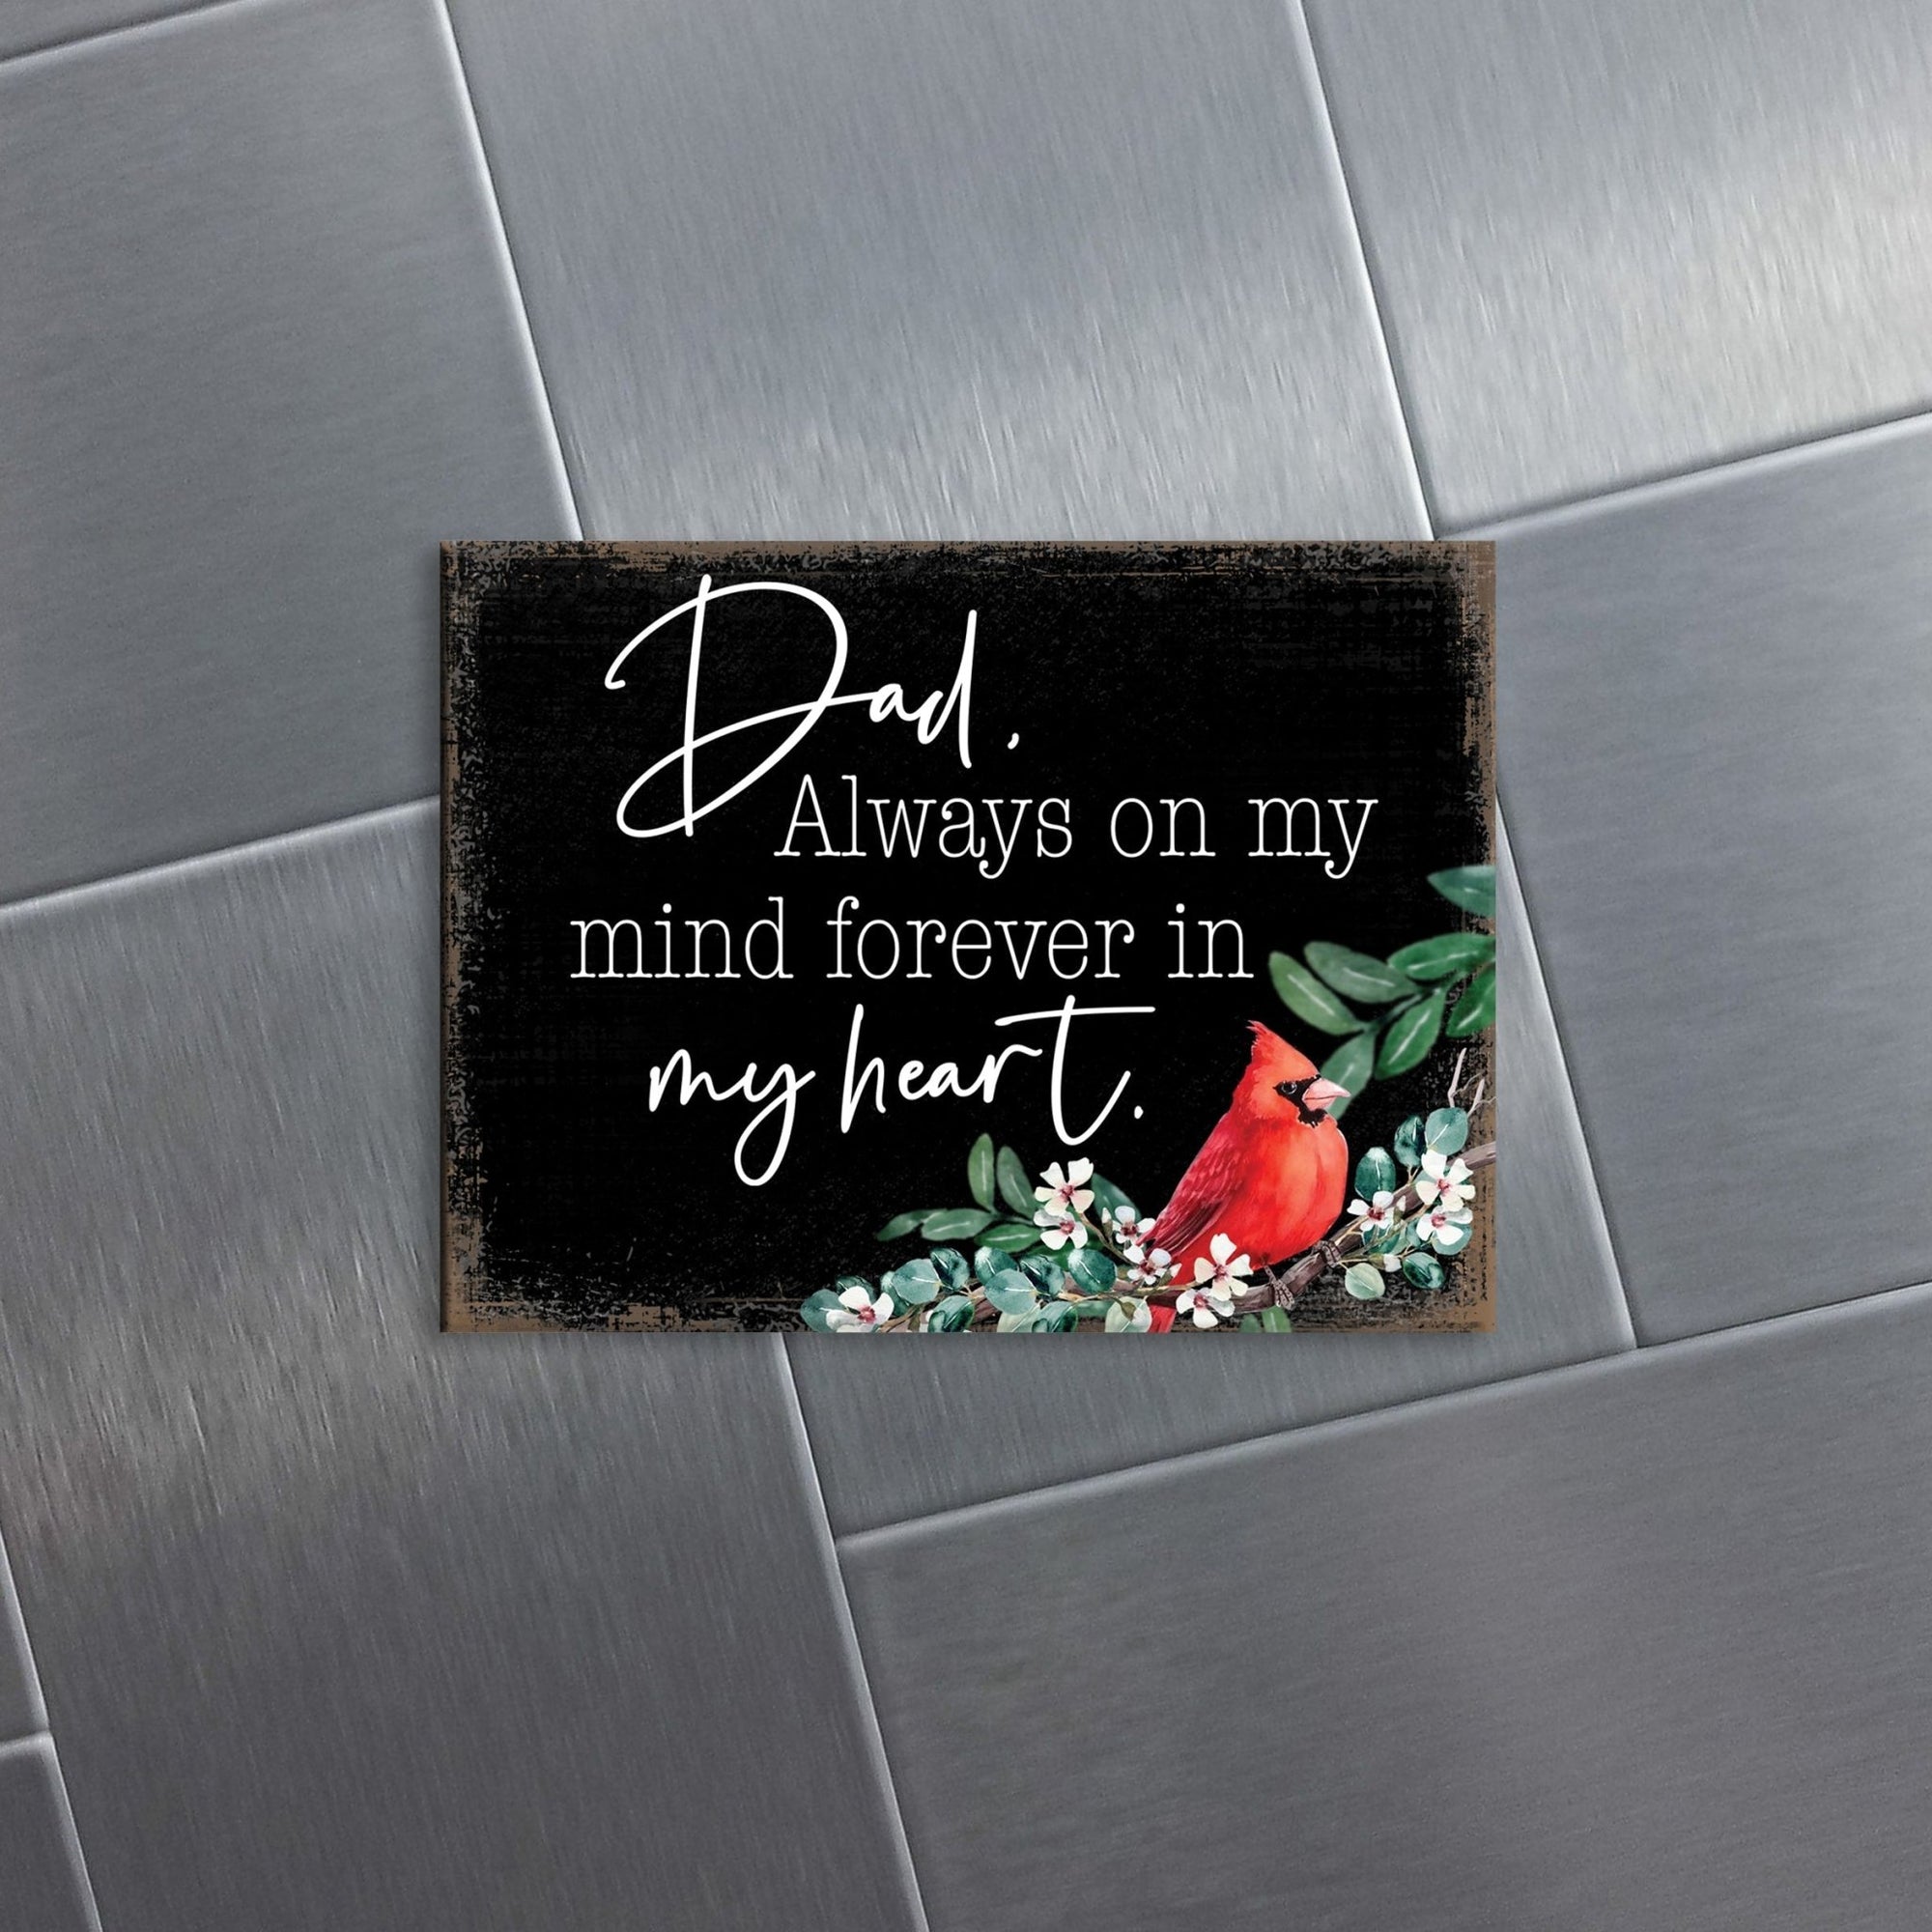 Remembering a loved one with a cardinal-themed memorial magnet for your home decor.